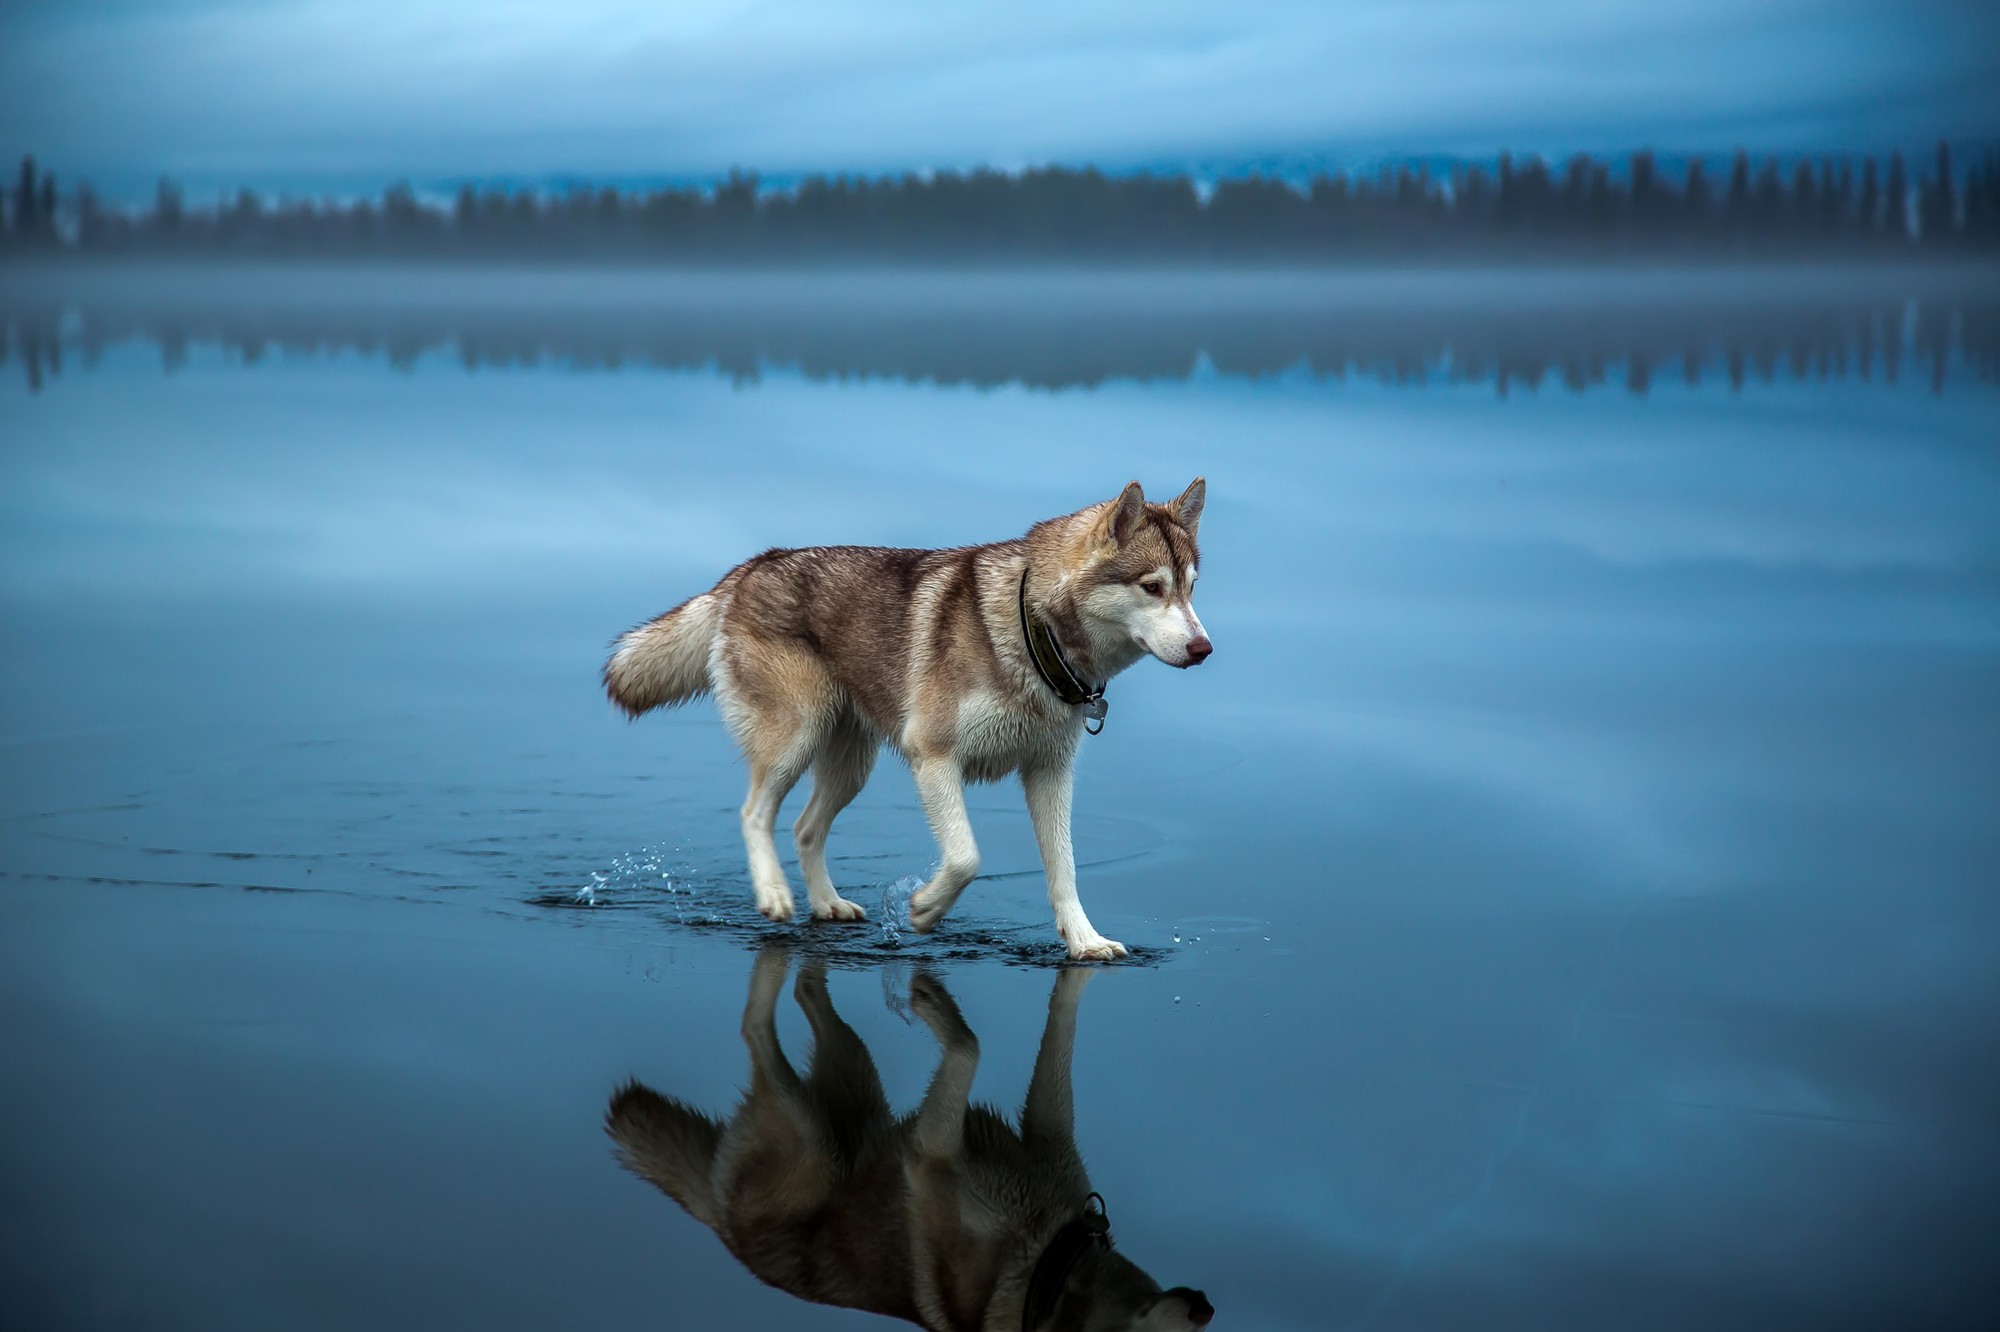 General 2000x1332 dog animals Siberian Husky  water lake mist trees forest reflection depth of field nature landscape clouds alone blue walking mammals